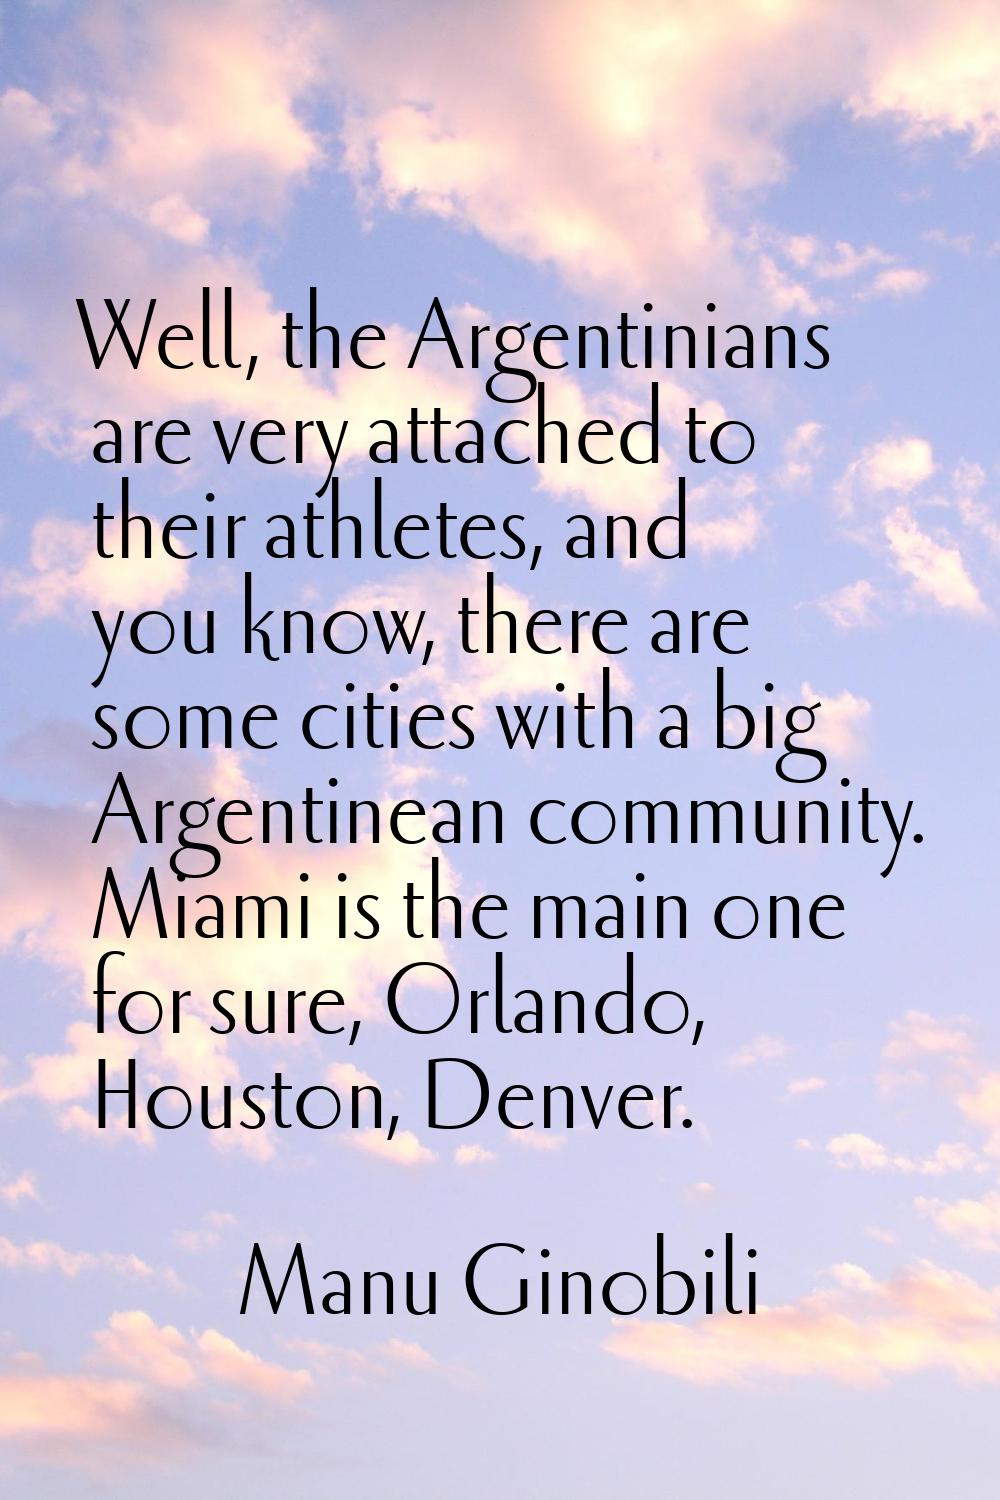 Well, the Argentinians are very attached to their athletes, and you know, there are some cities wit